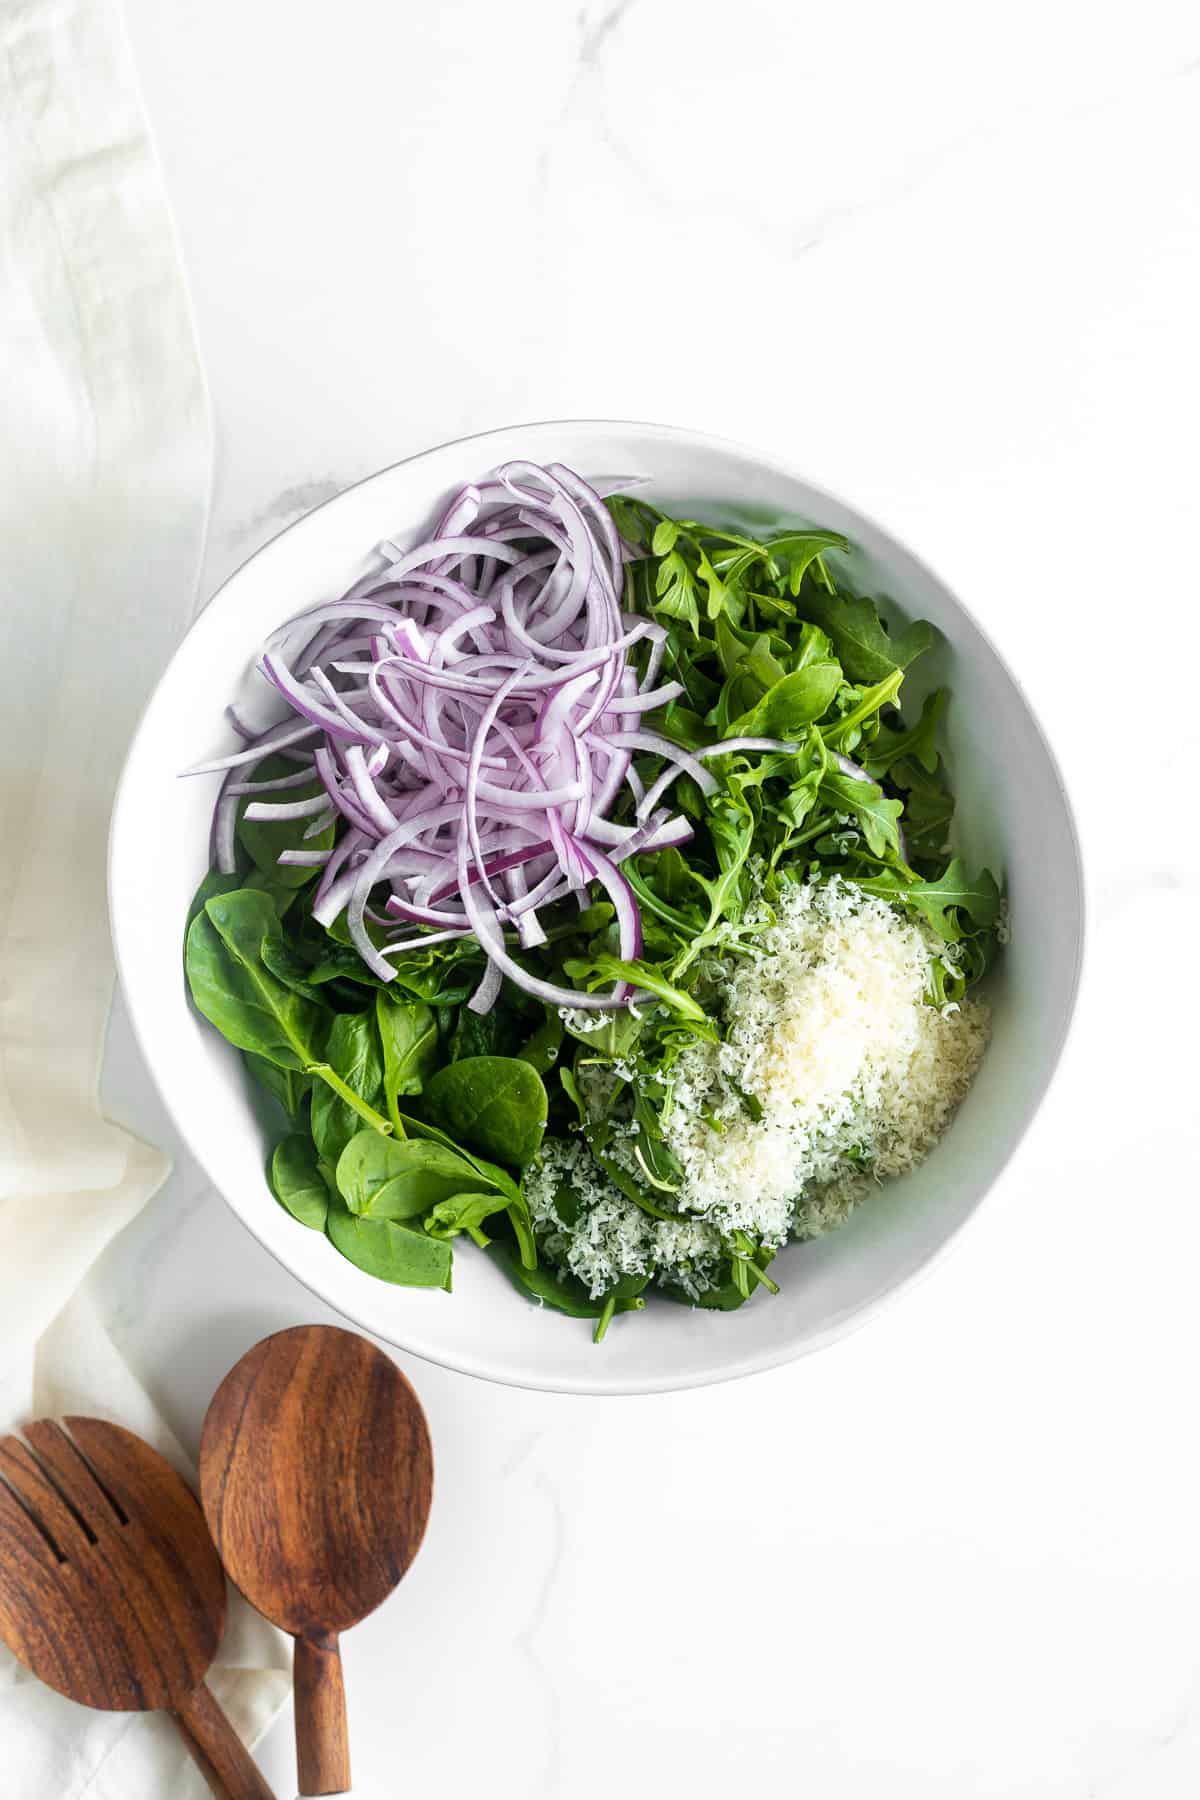 Greens in a bowl with sliced red onion and parmesan.